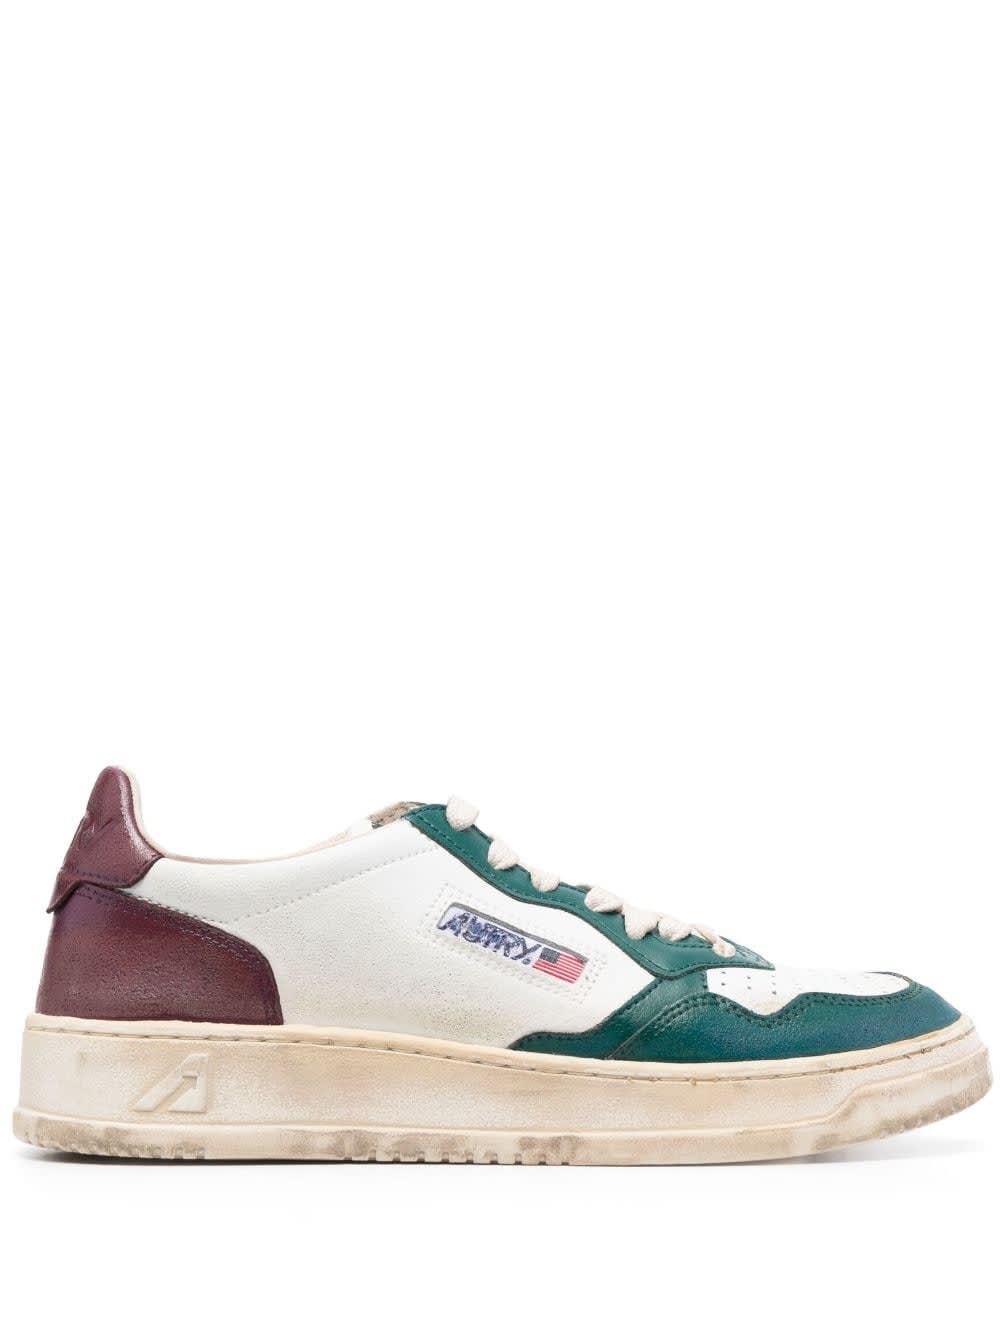 AUTRY SUPER VINTAGE MEDALIST LOW SNEAKERS IN WHITE, GREEN AND BURGUNDY LEATHER